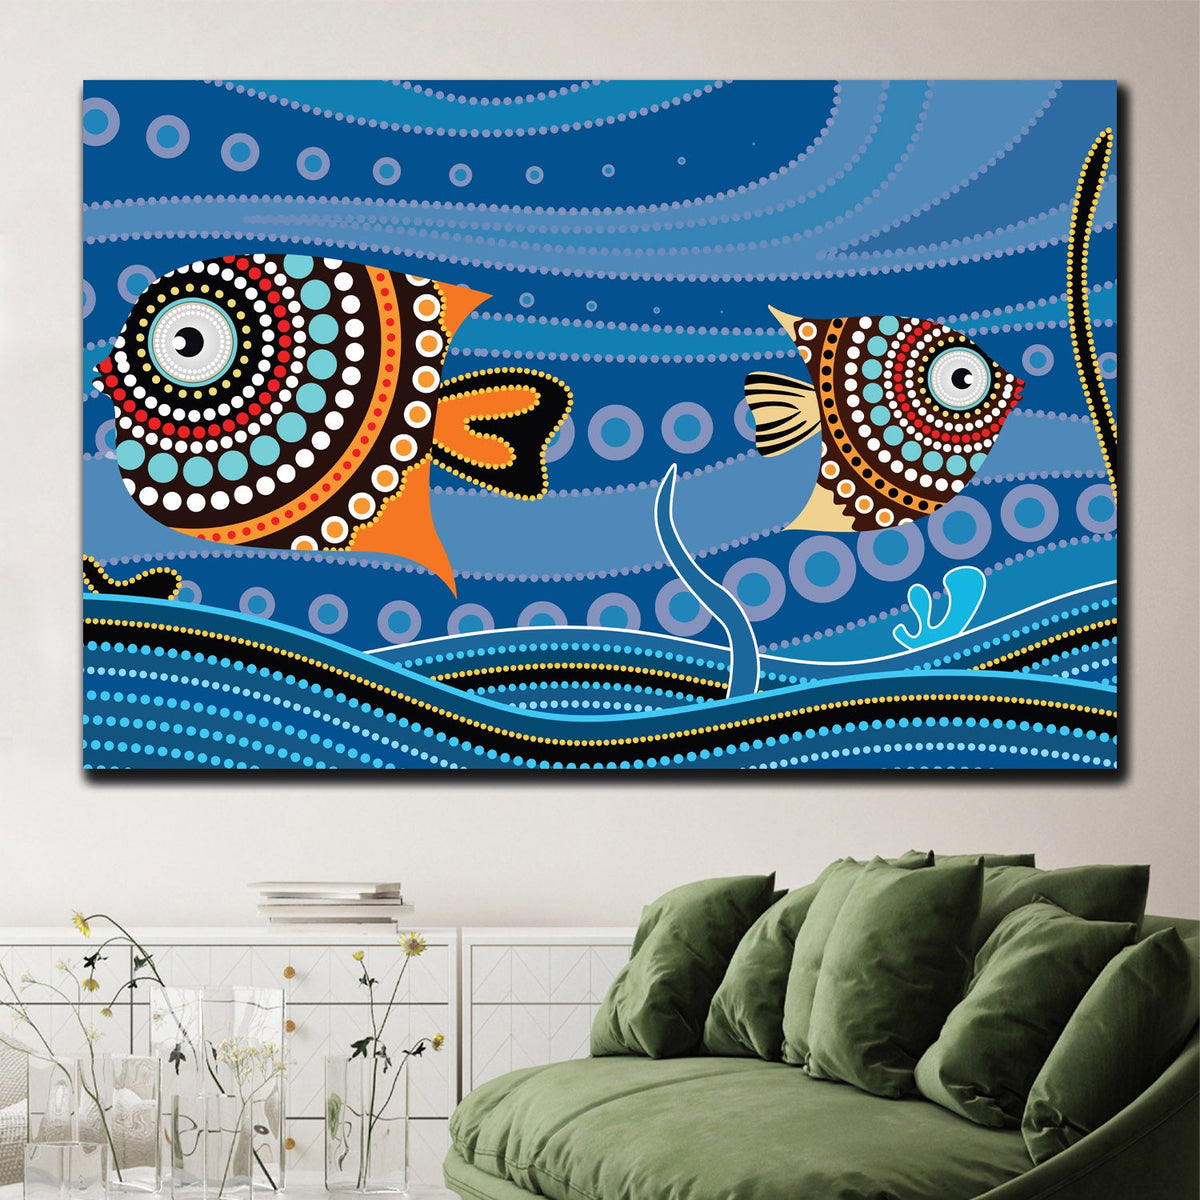 https://cdn.shopify.com/s/files/1/0387/9986/8044/products/FishintheSeaCanvasArtprintStretched-1.jpg